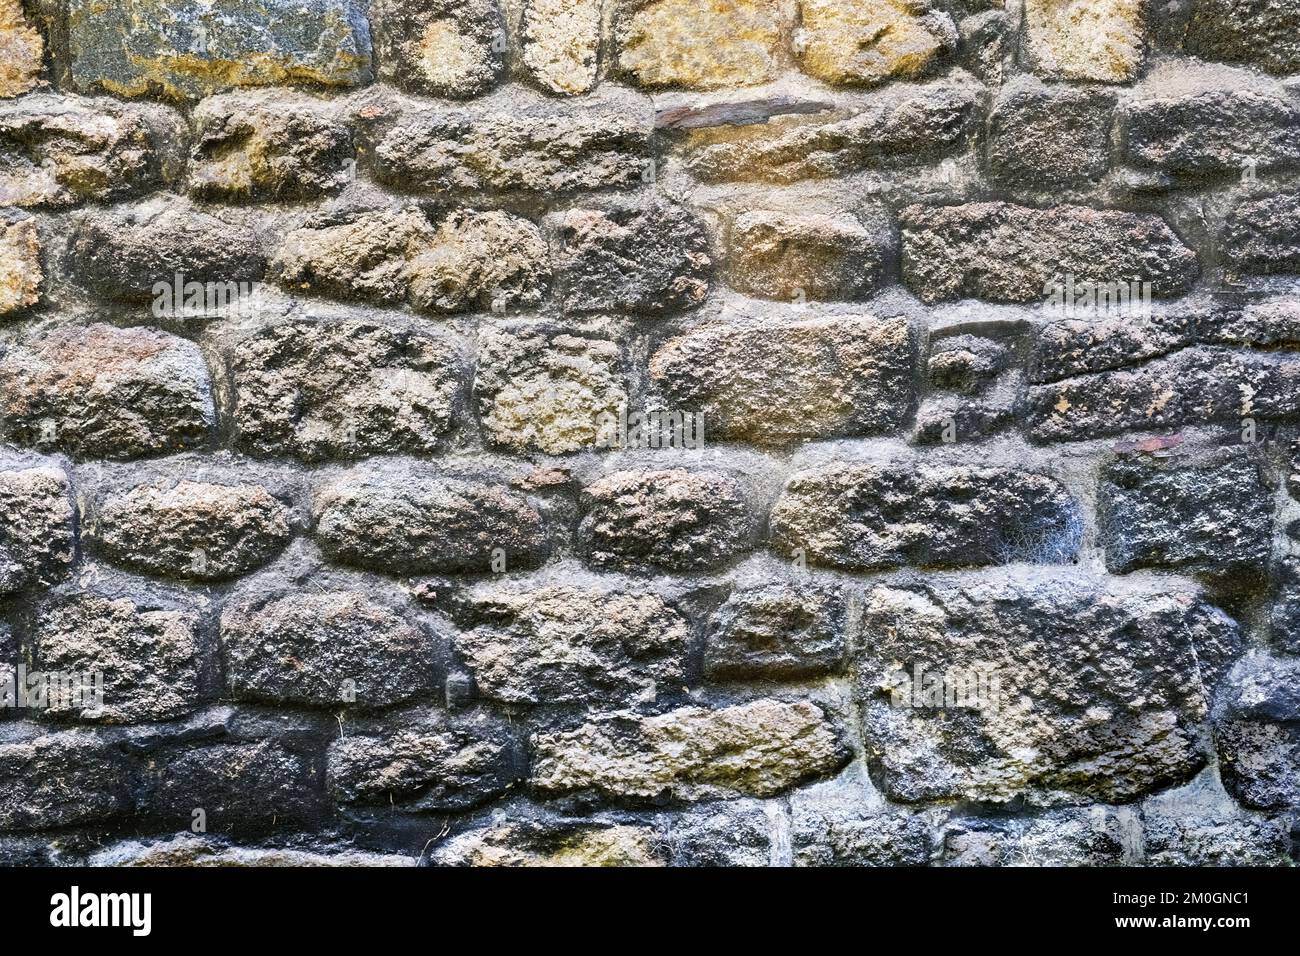 Full frame image of a stone wall, ideal for backgrounds - John Gollop Stock Photo